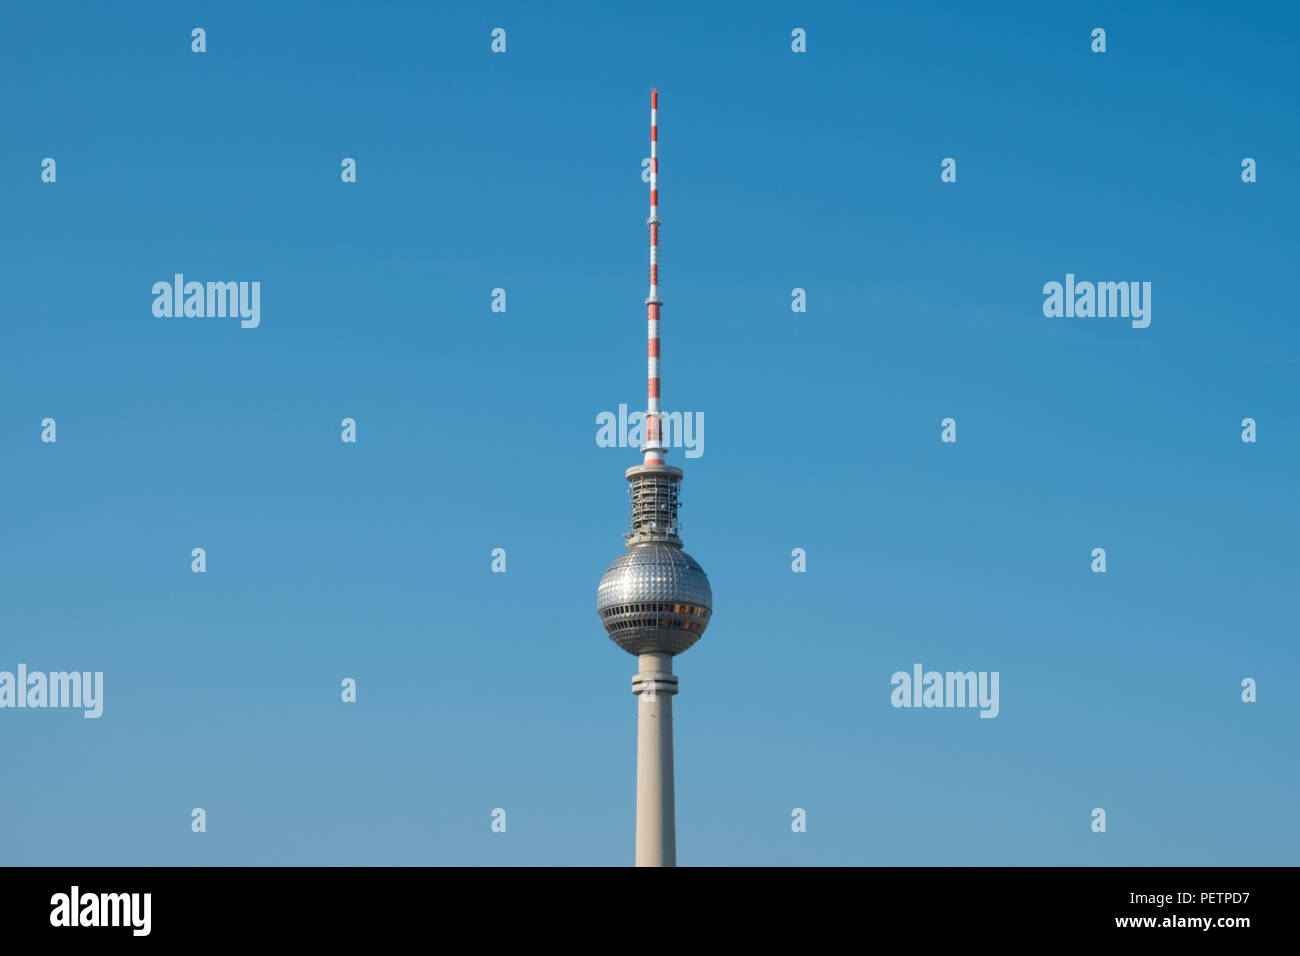 Tv tower / television Tower / Fernsehturm in Berlin Stock Photo